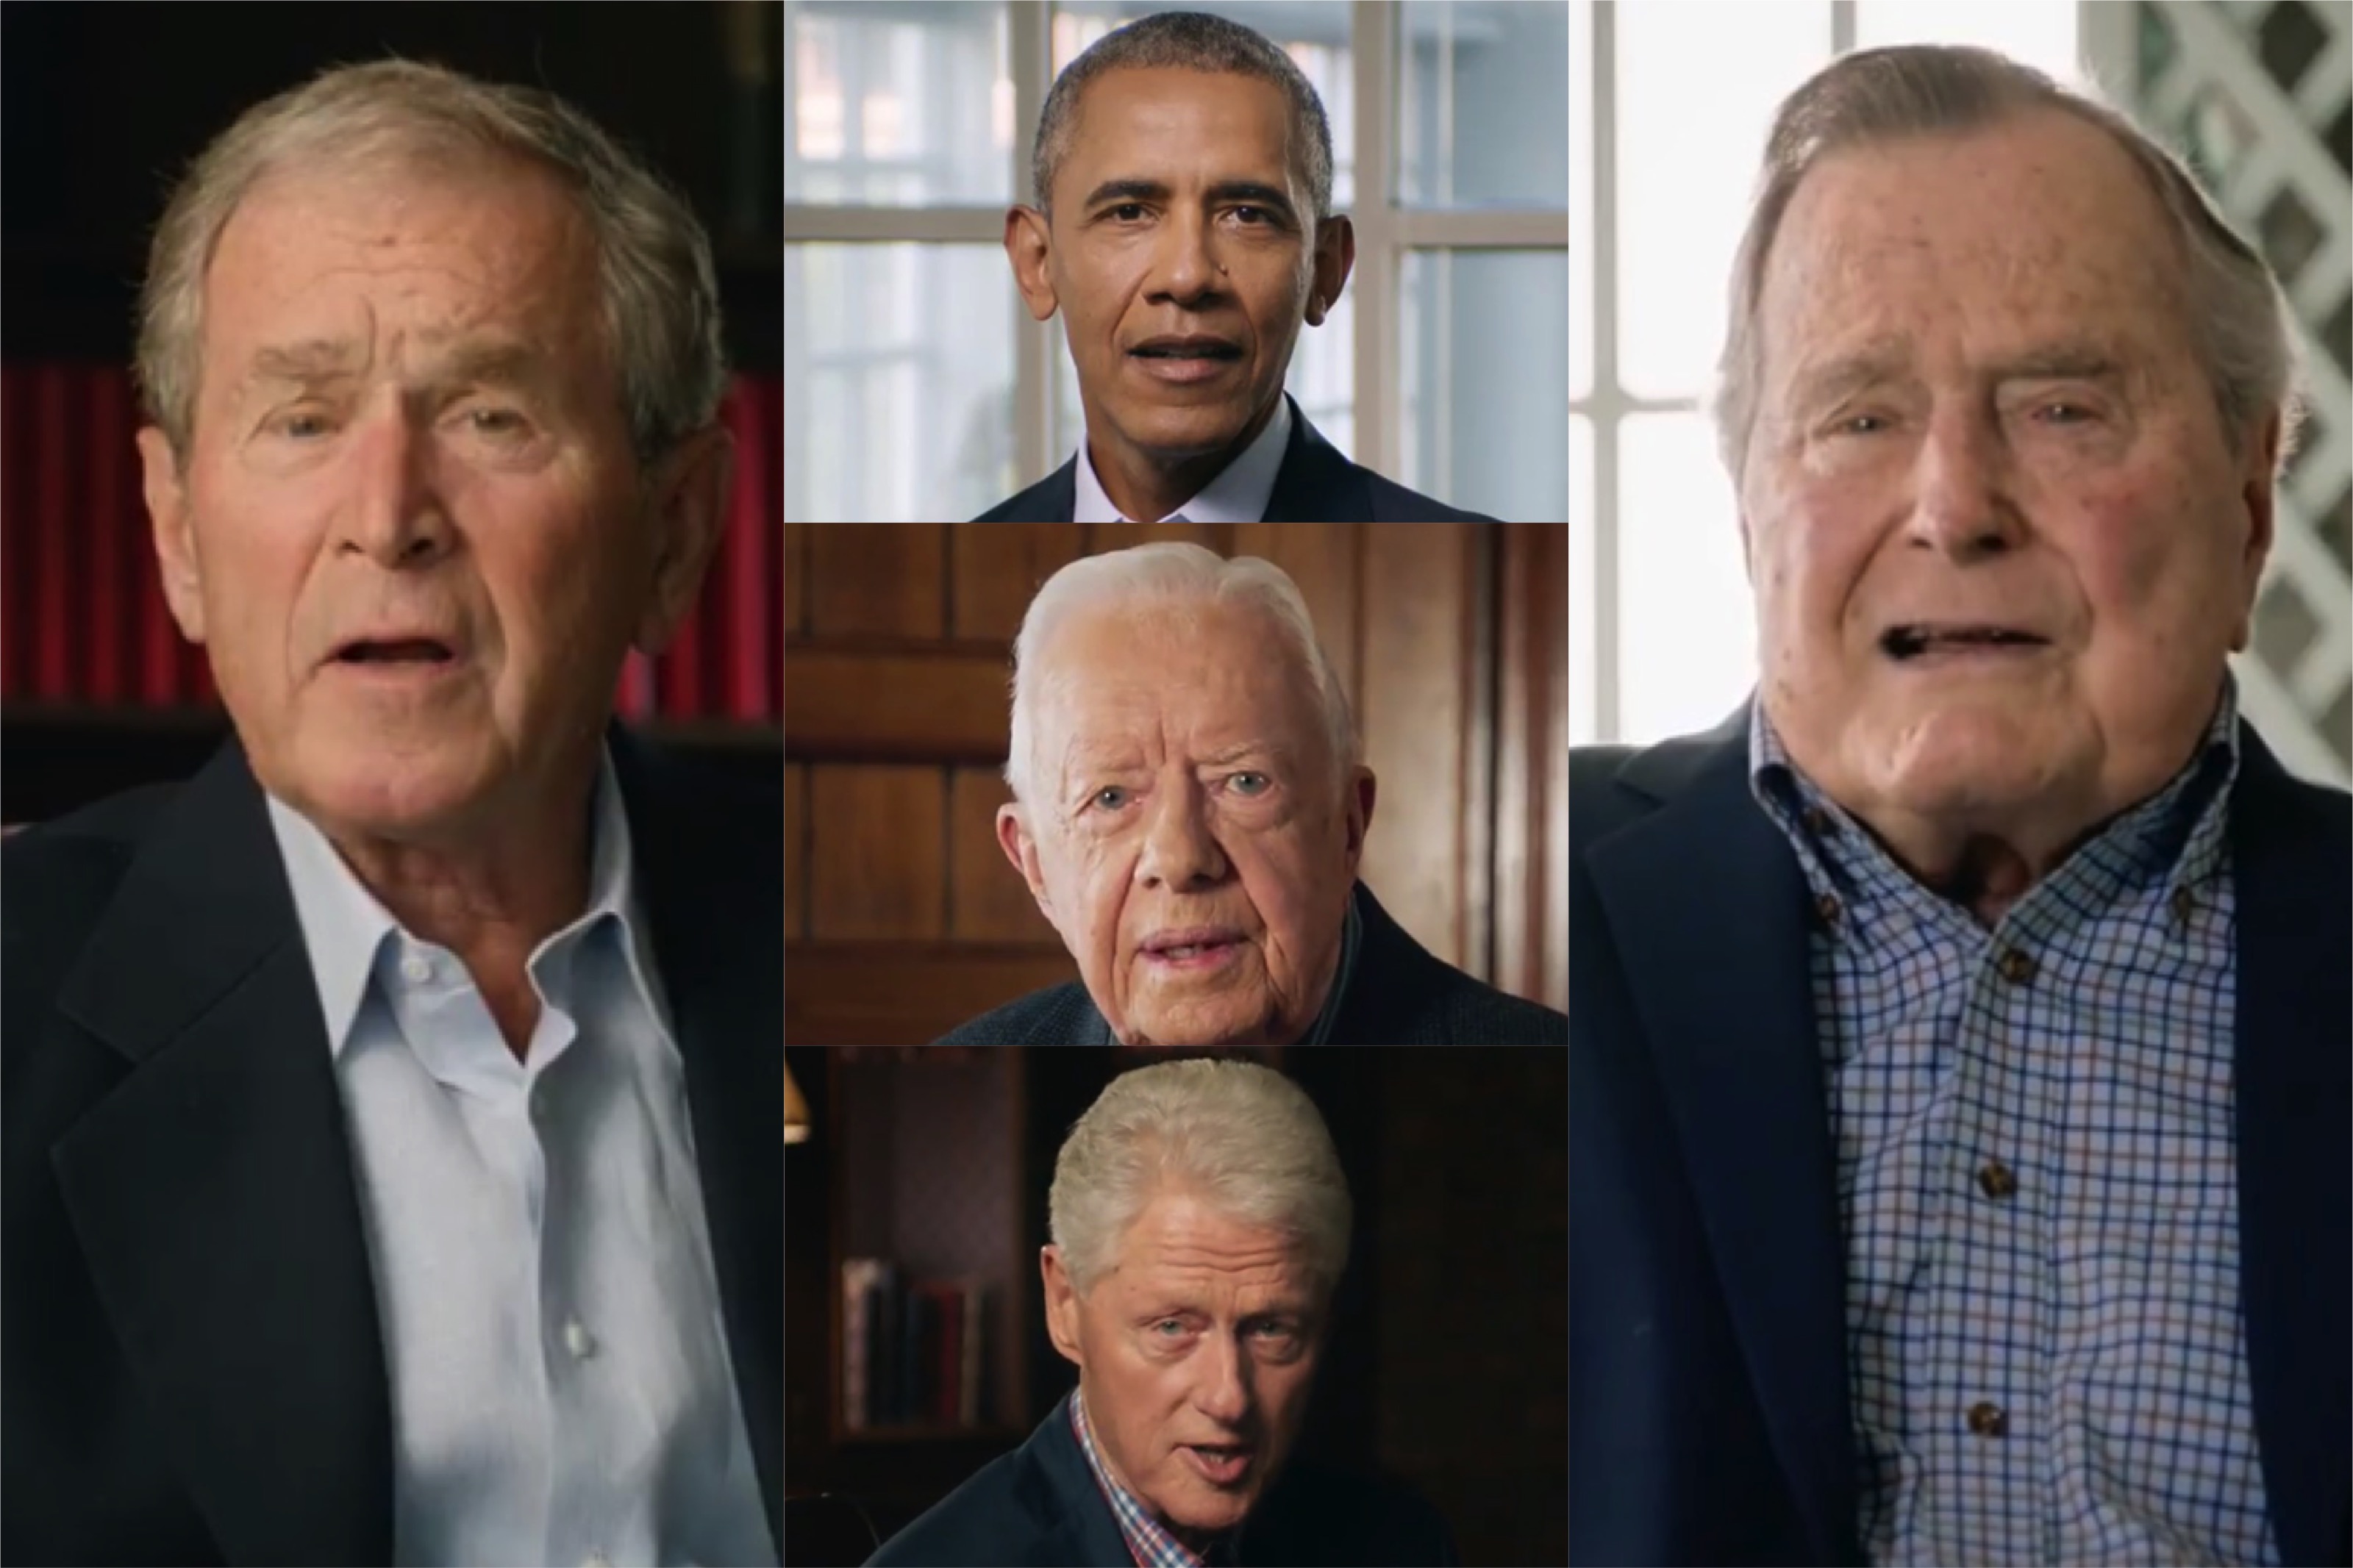 All 5 ex-U.S. presidents are pitching hurricane releif